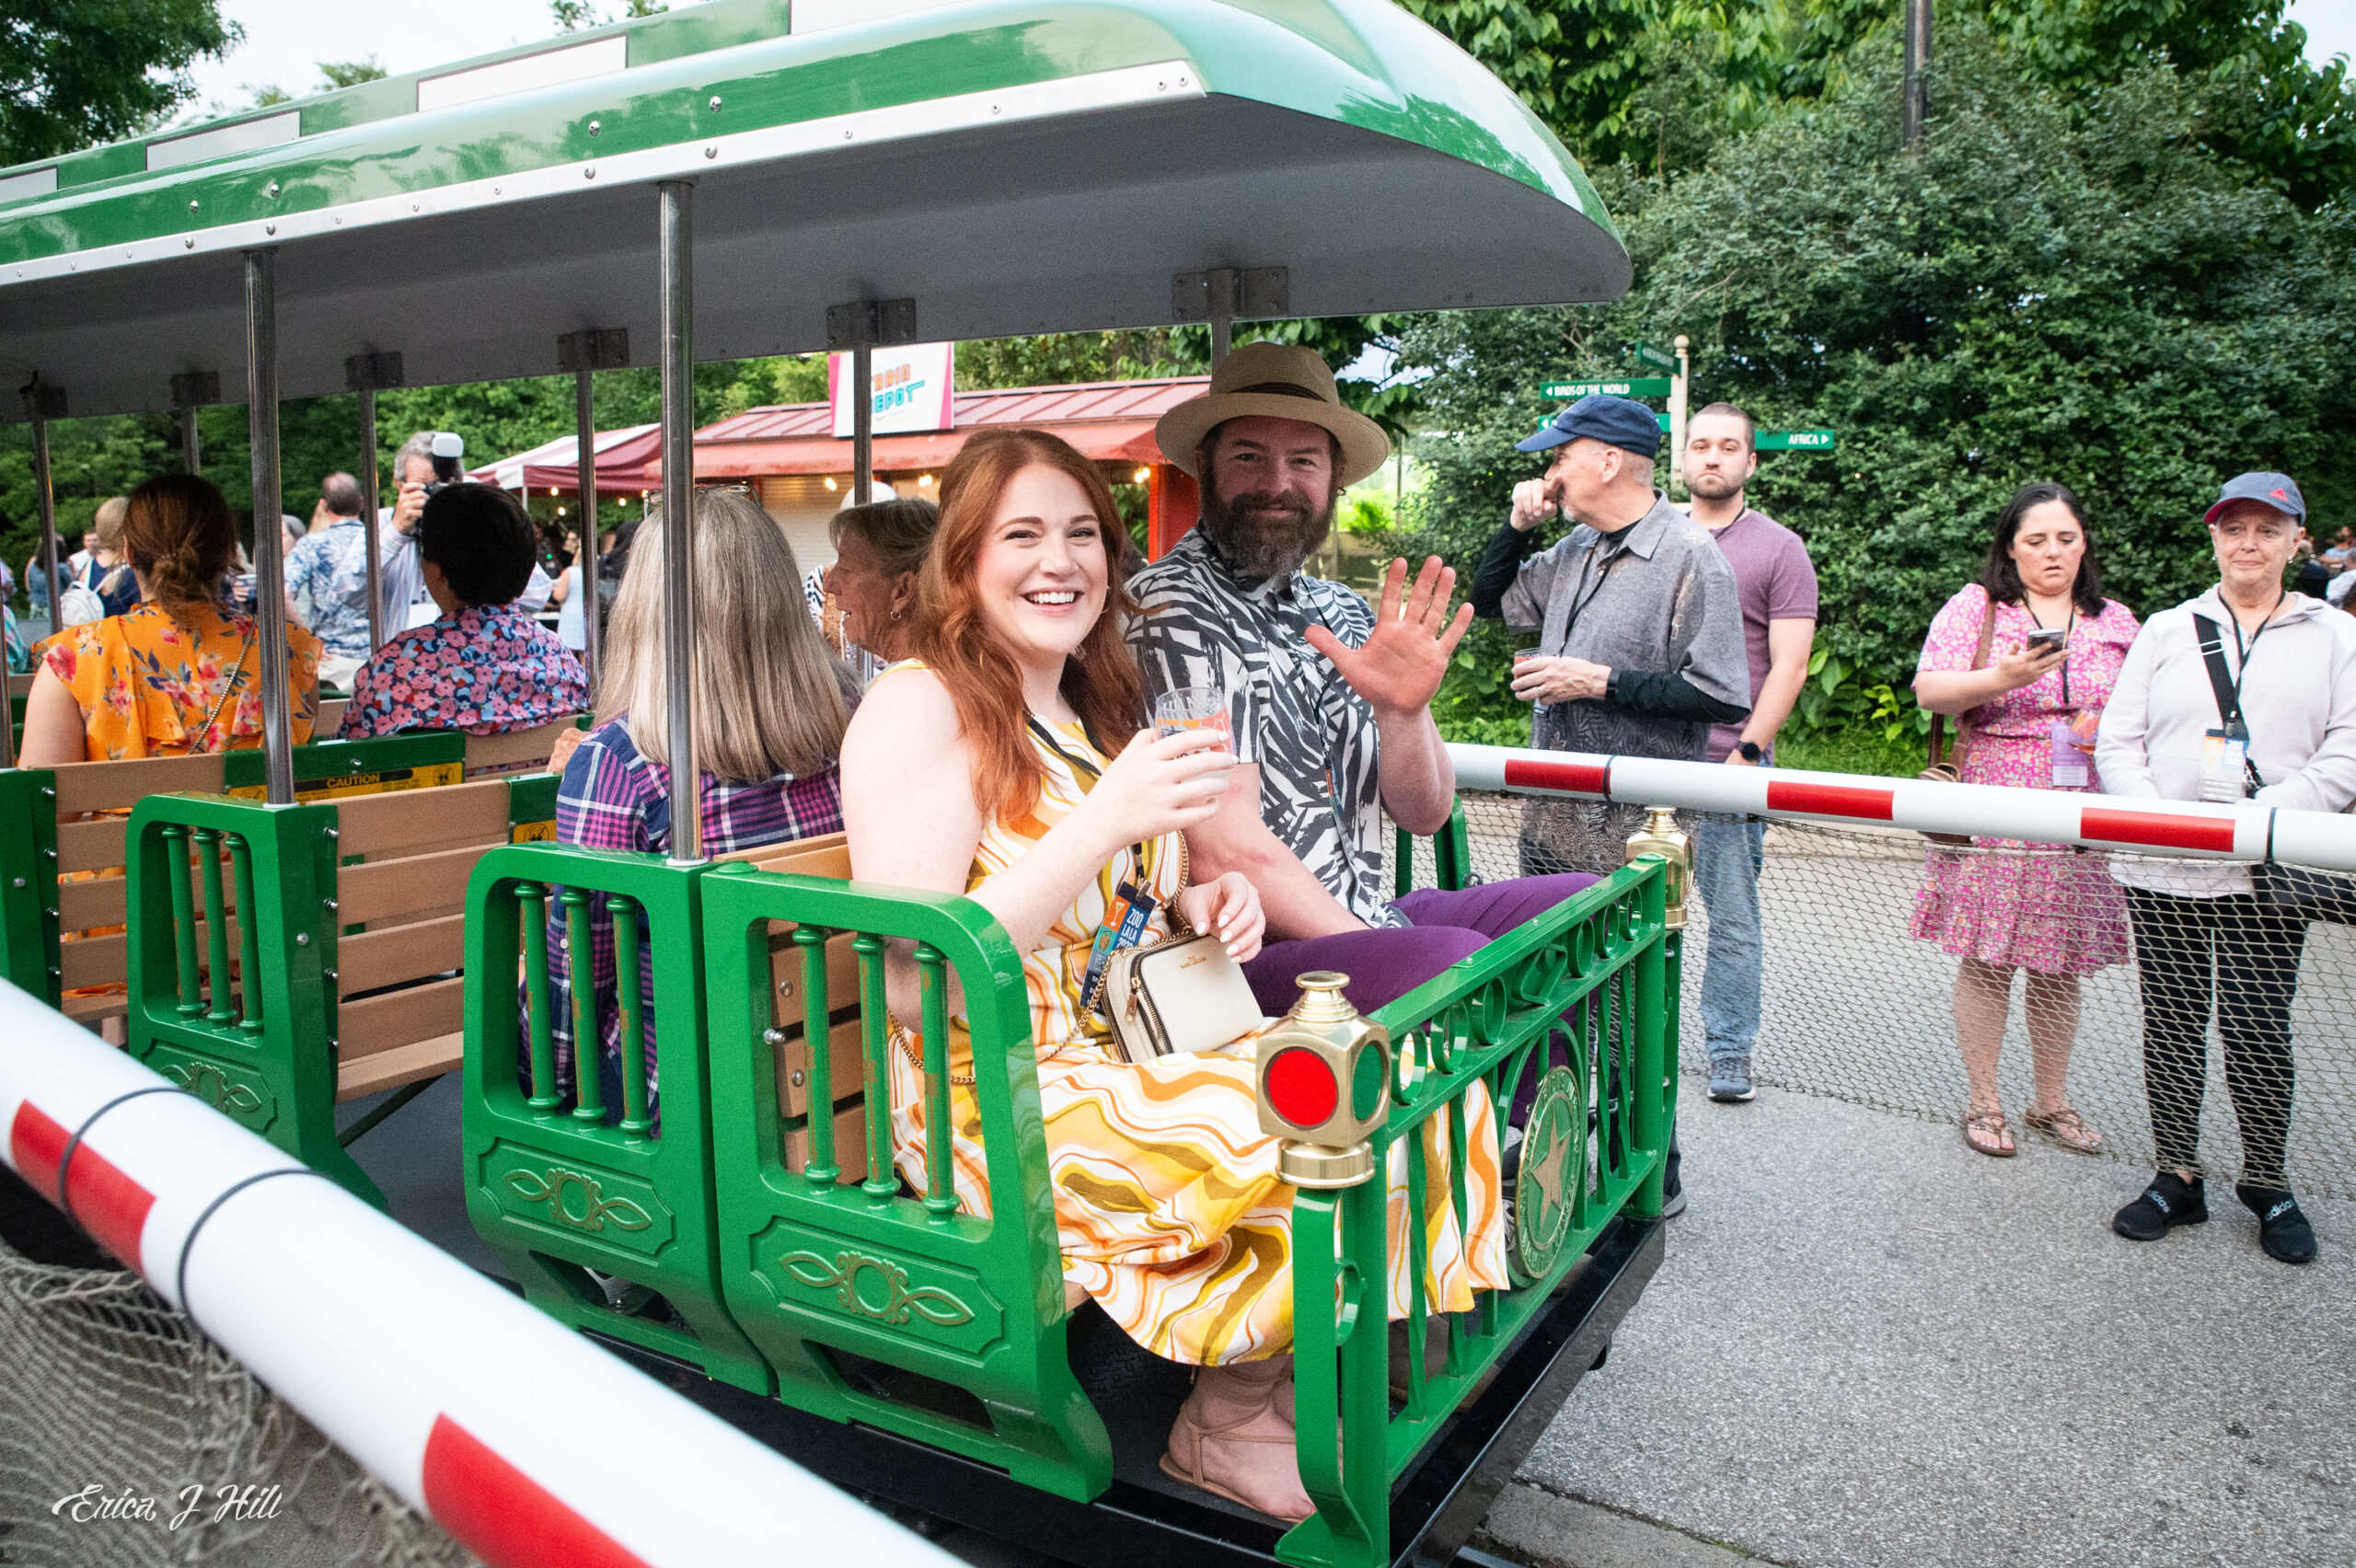 guests riding in the caboose of a green train during a zoo event